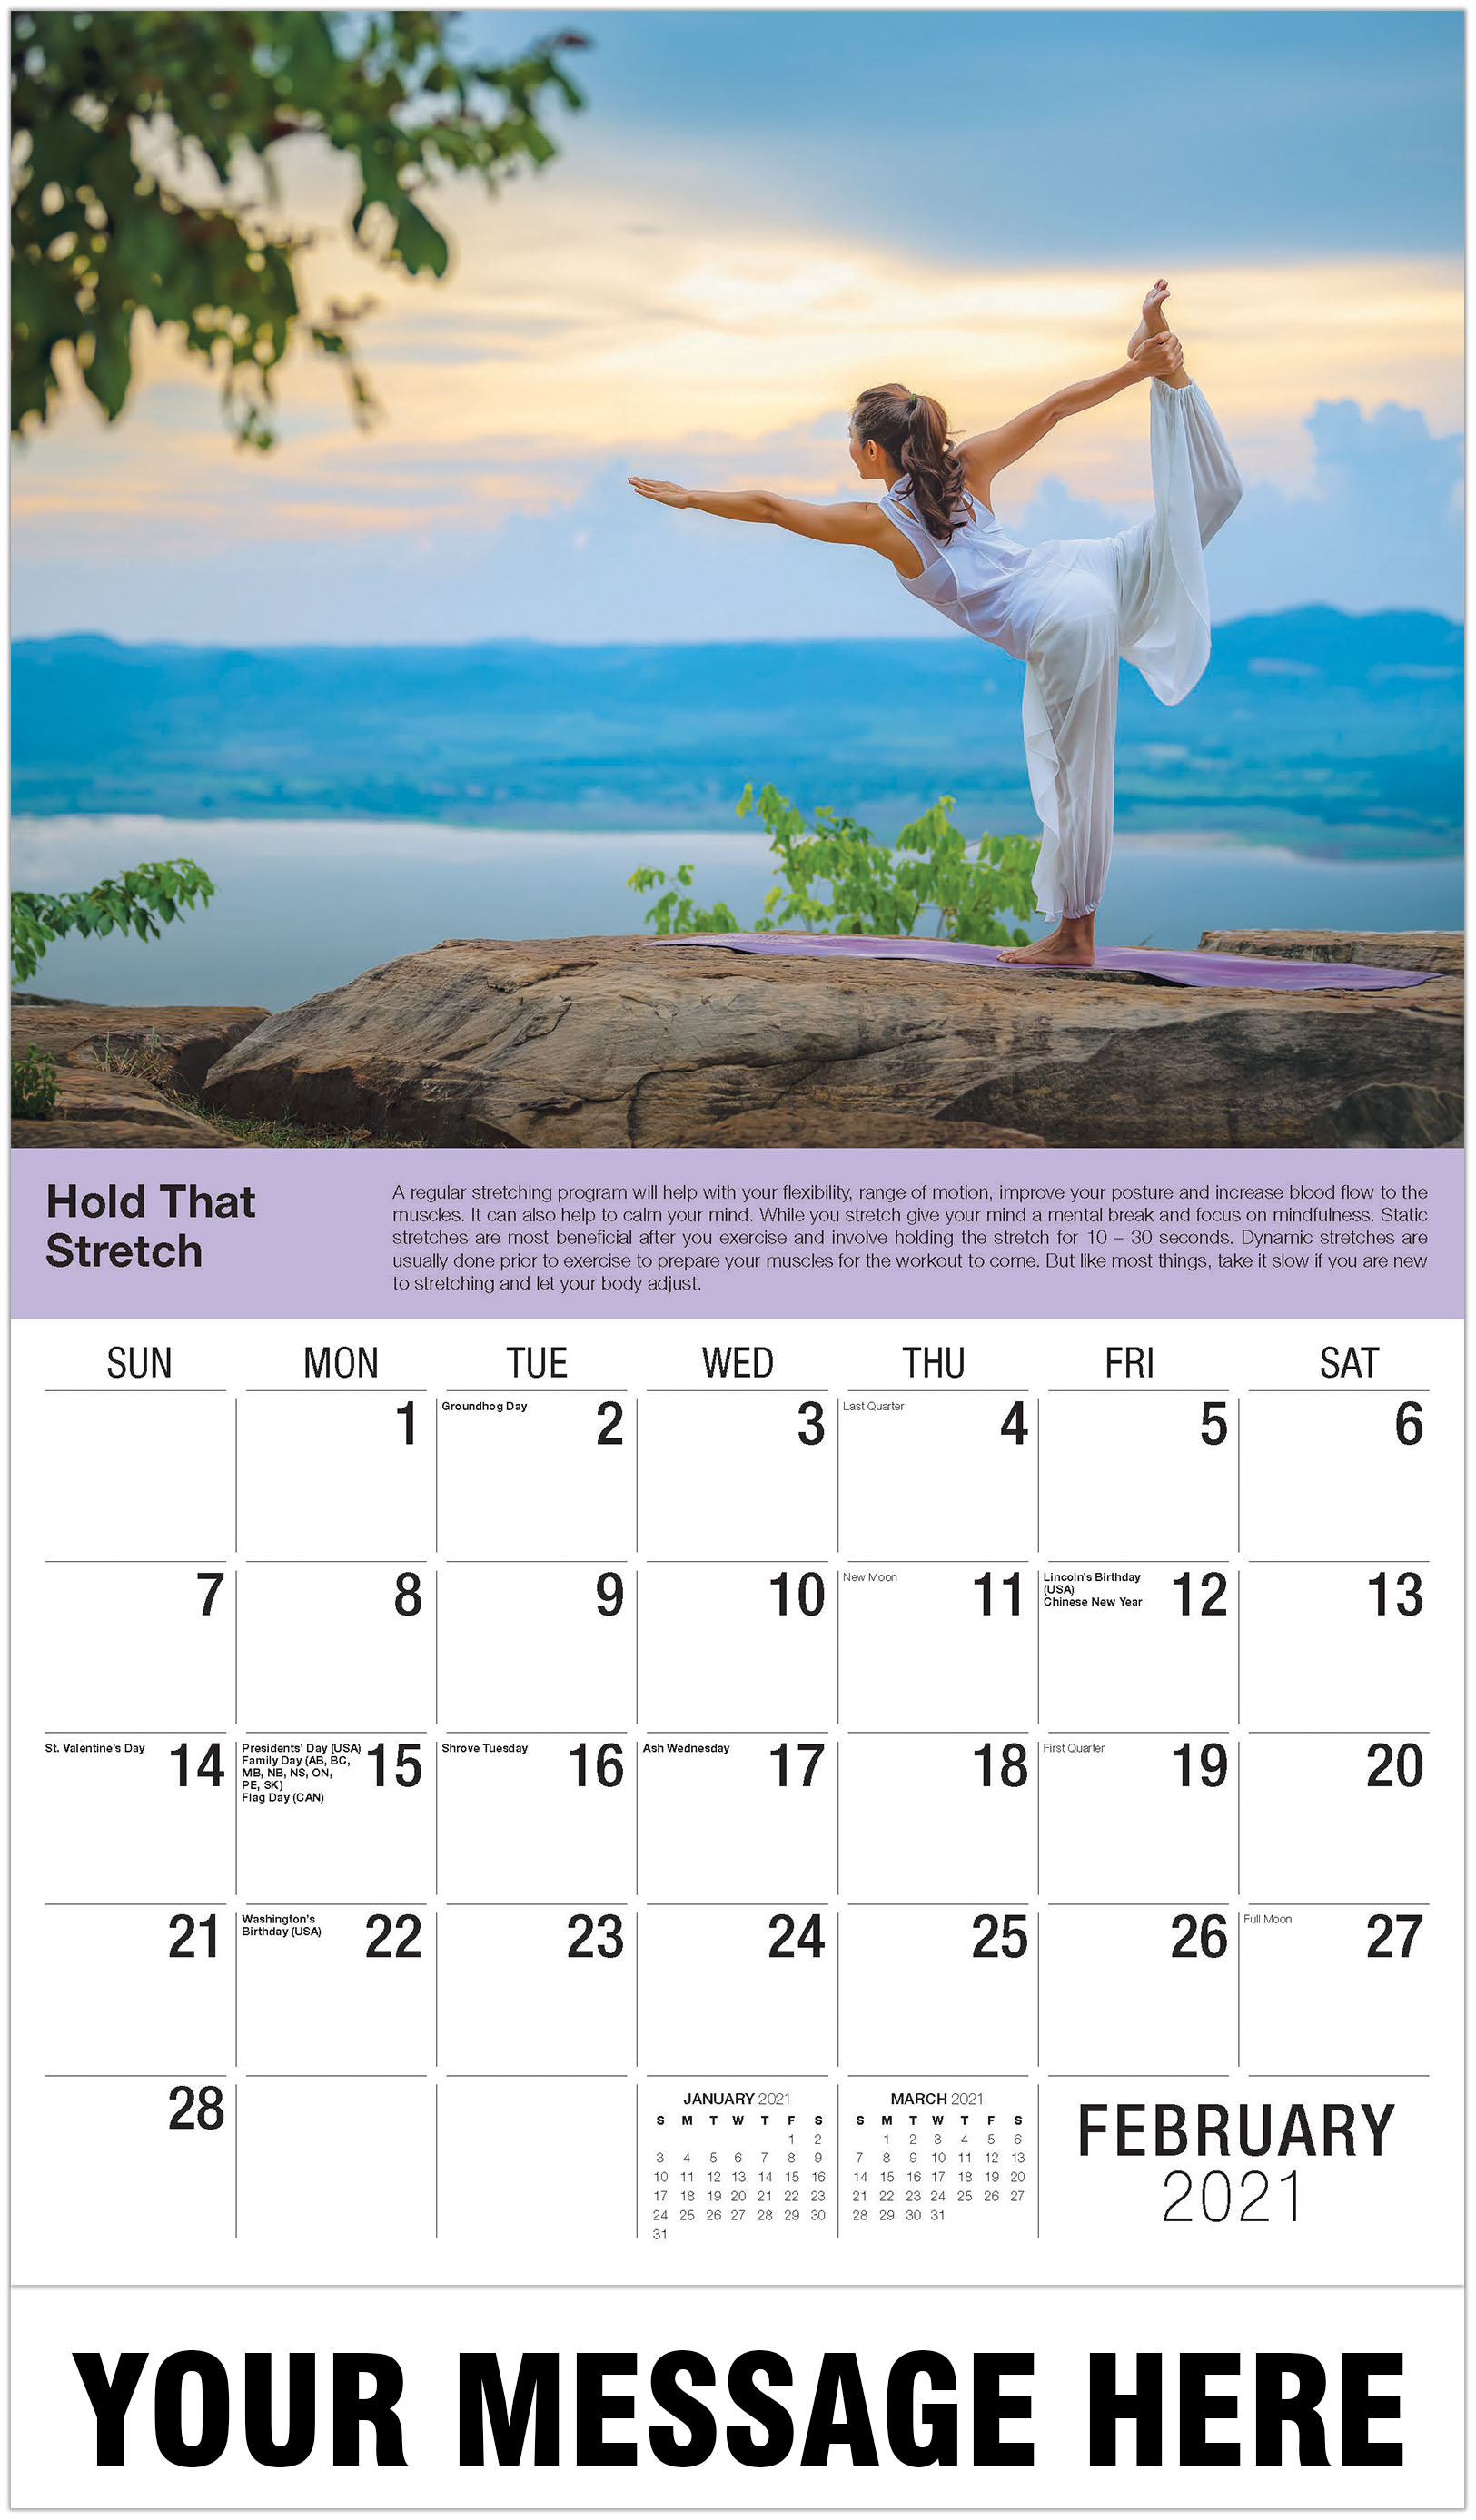 health-and-wellness-tips-2021-promotional-calendar-business-advertising